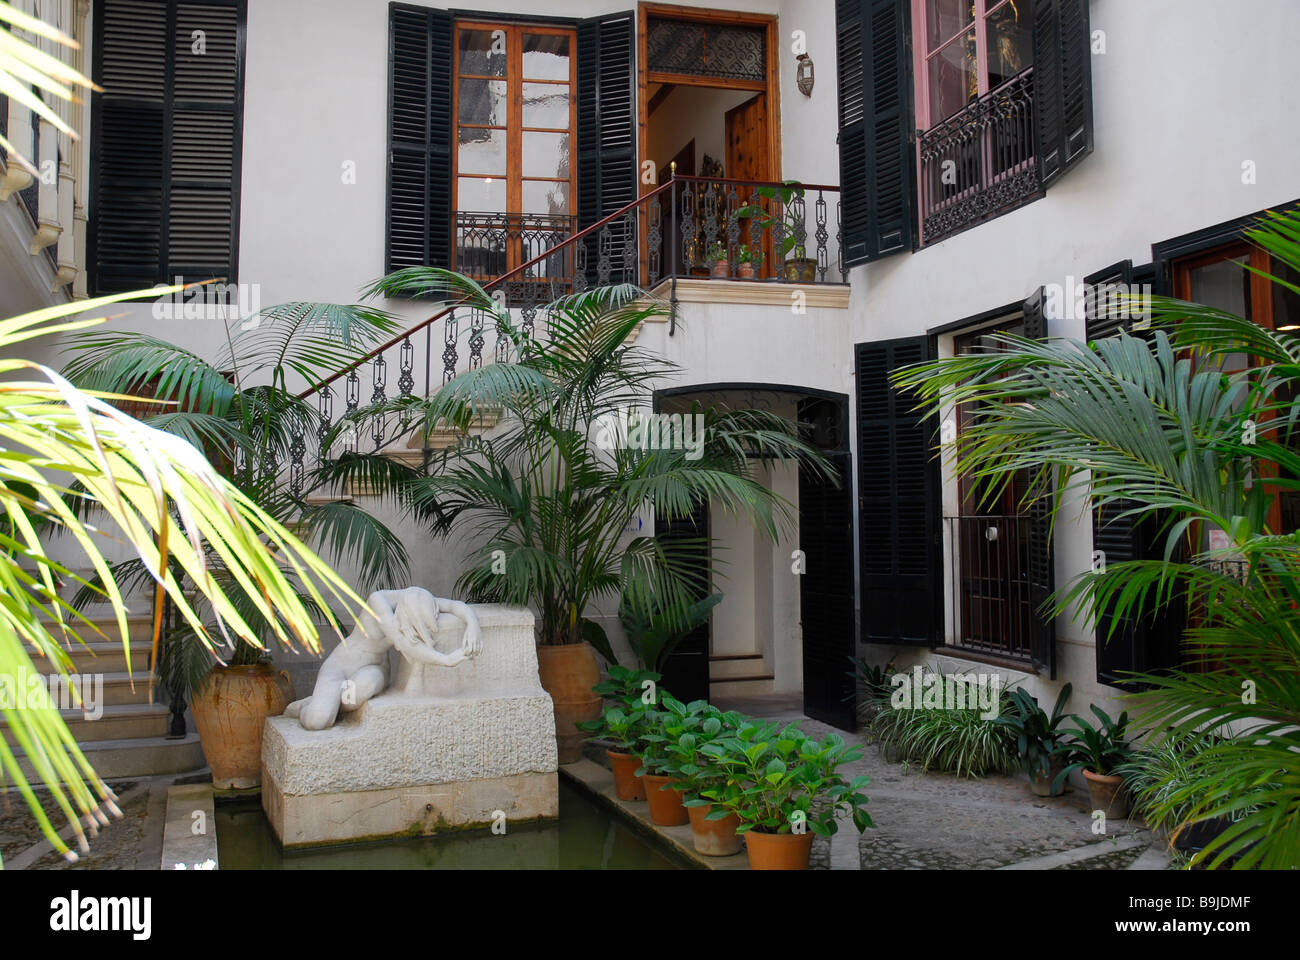 Inner courtyard, Patio, Casa Museo J. Torrents Llado, a museum in a former city palace, historic city centre of La Portella, Ci Stock Photo